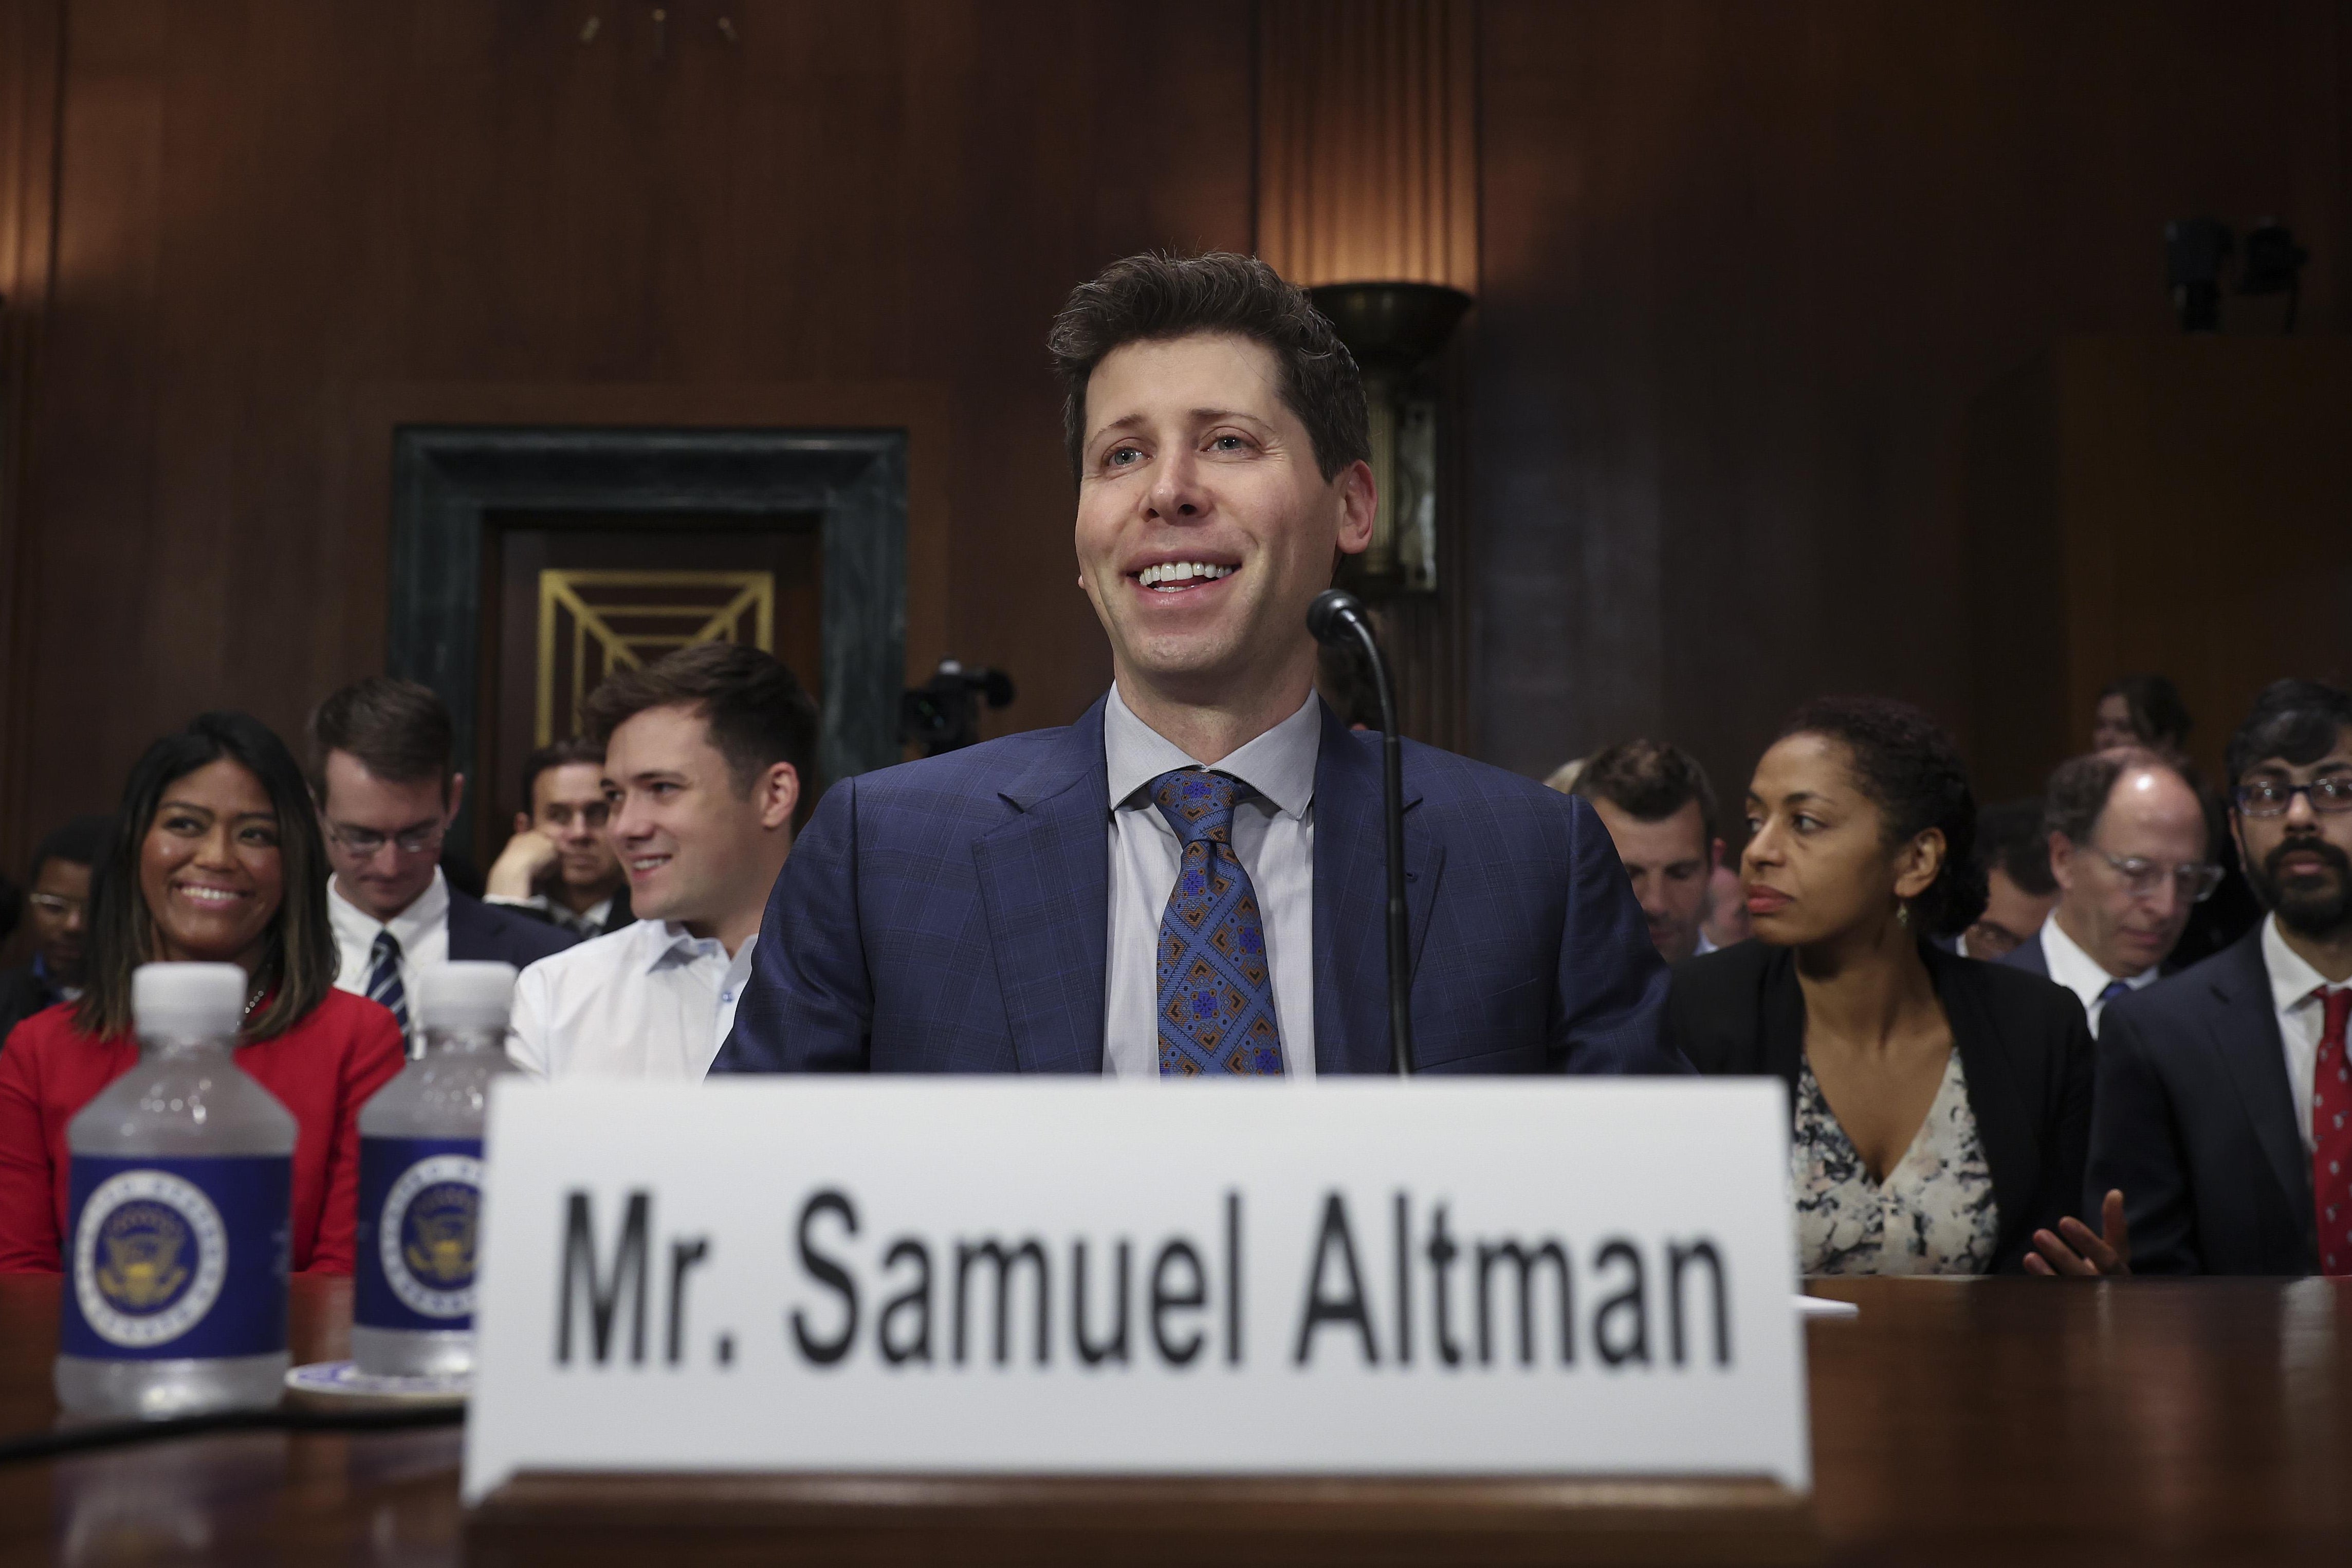 WASHINGTON, DC - MAY 16: Samuel Altman, CEO of OpenAI, appears for testimony before the Senate Judiciary Subcommittee on Privacy, Technology, and the Law May 16, 2023 in Washington, DC. The committee held an oversight hearing to examine A.I., focusing on rules for artificial intelligence. (Photo by Win McNamee/Getty Images)